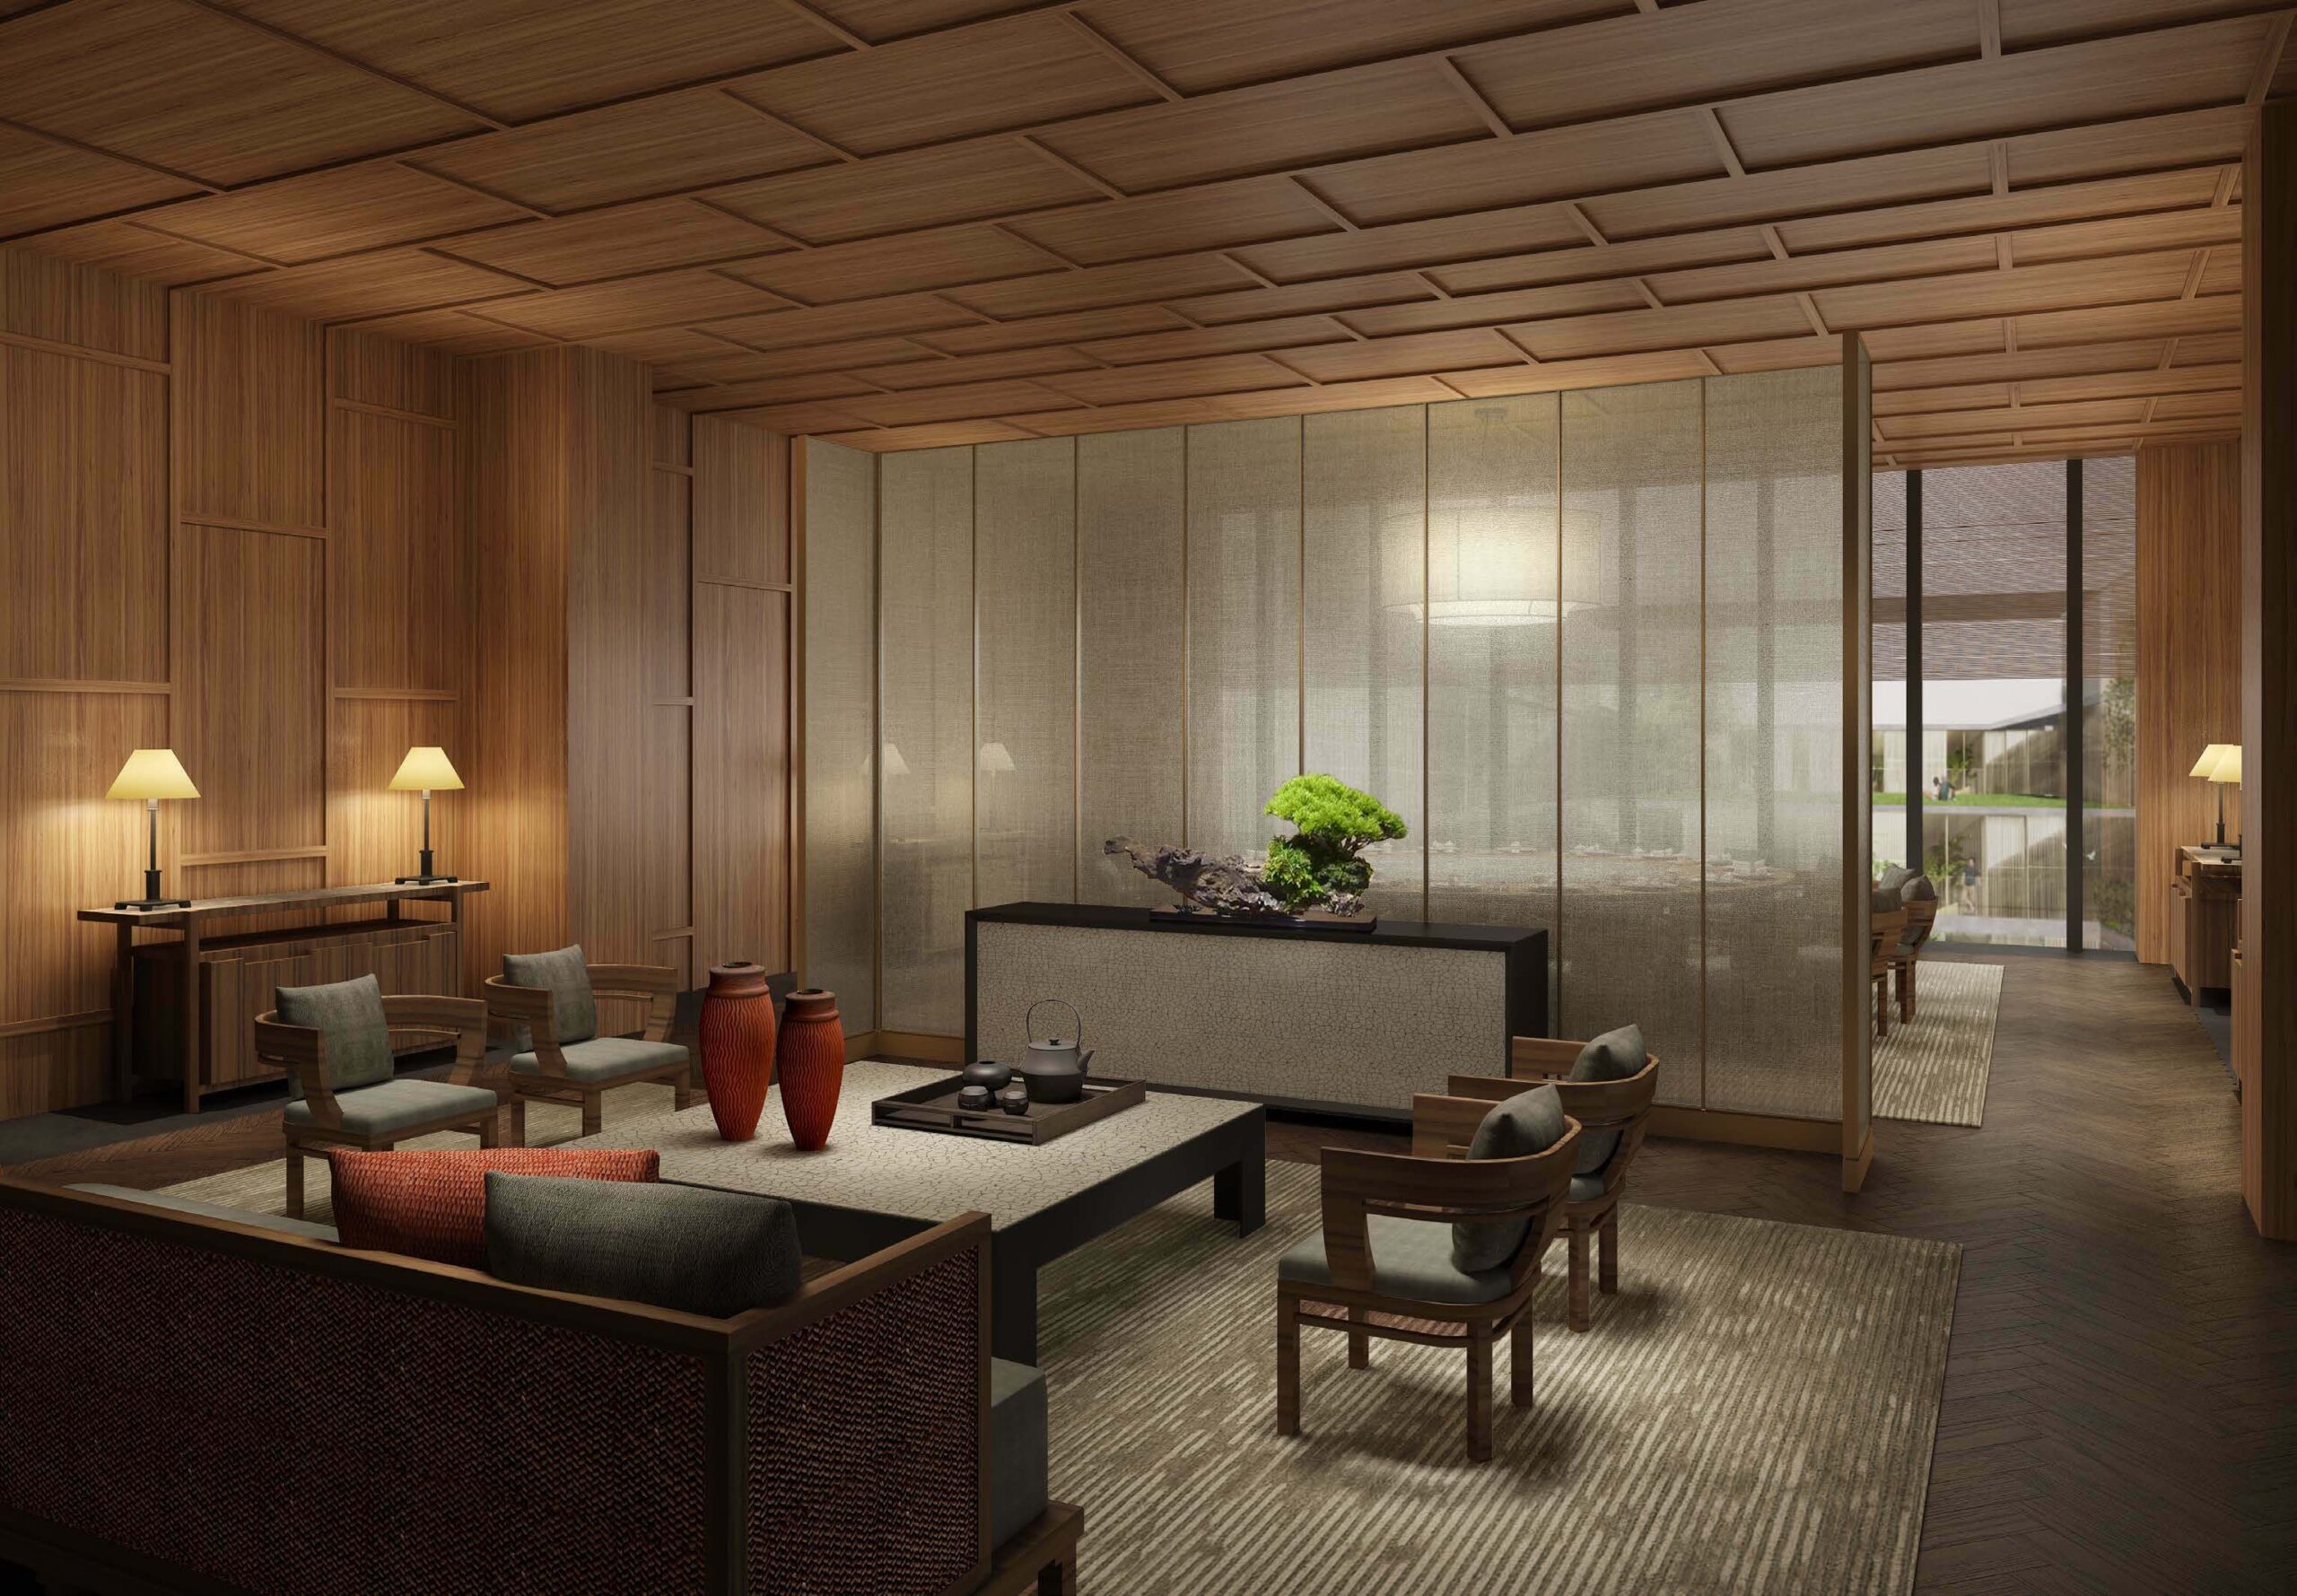 005.PRIVATE DINING ROOM RENDERING